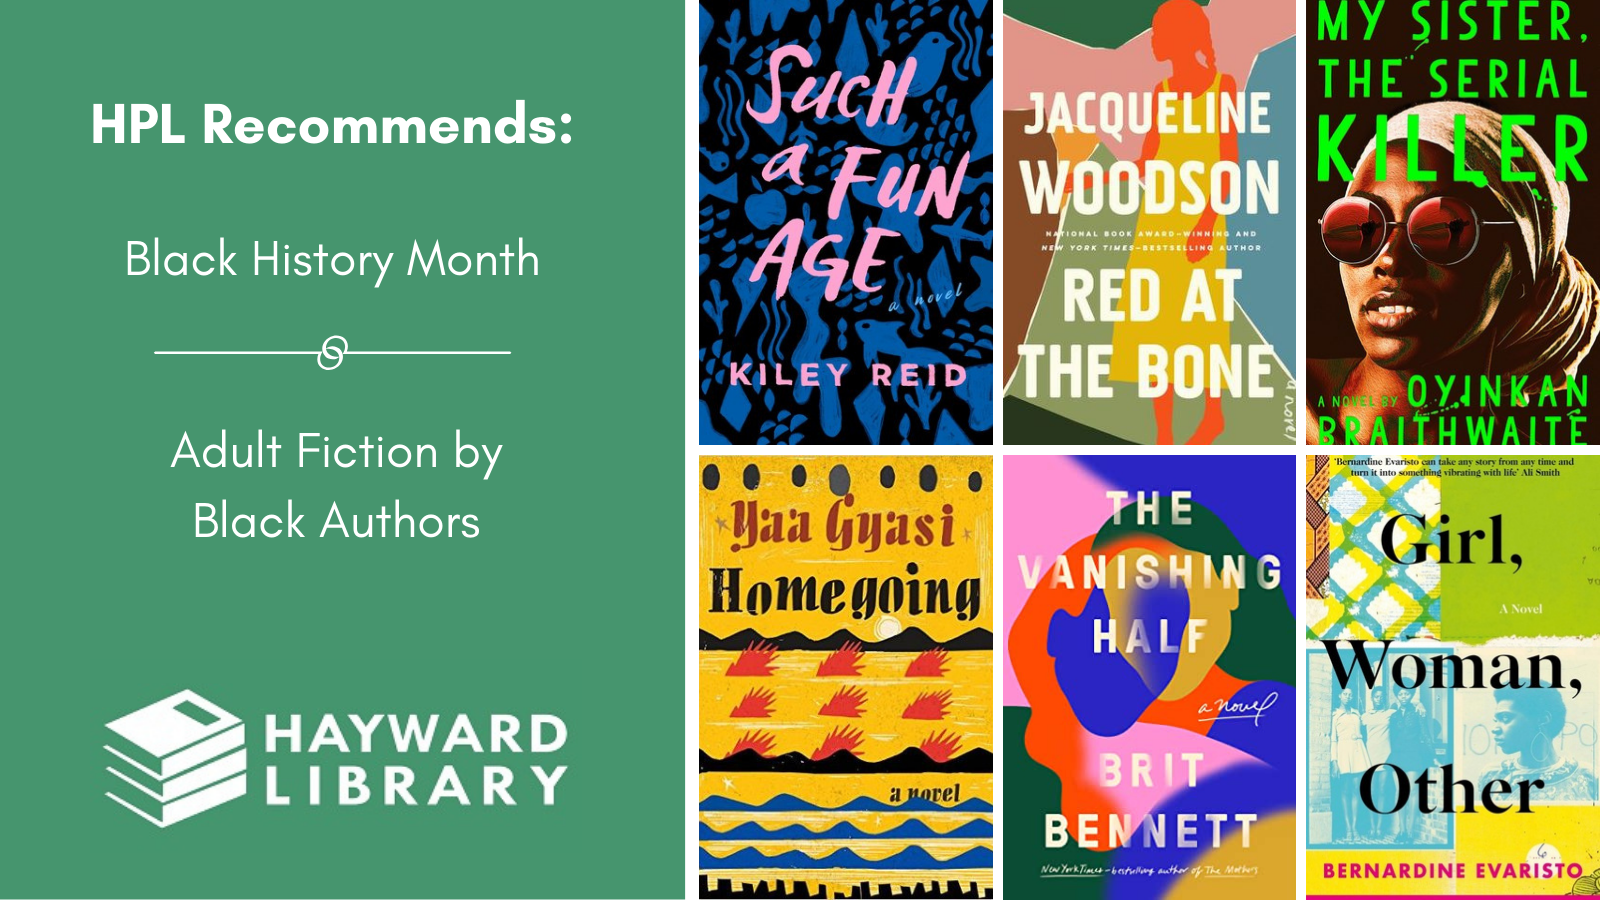 Collage of book covers with a green block on left side that says HPL Recommends, Black History Month, Adult Fiction by Black Authors in white text, with Hayward Library logo below it.